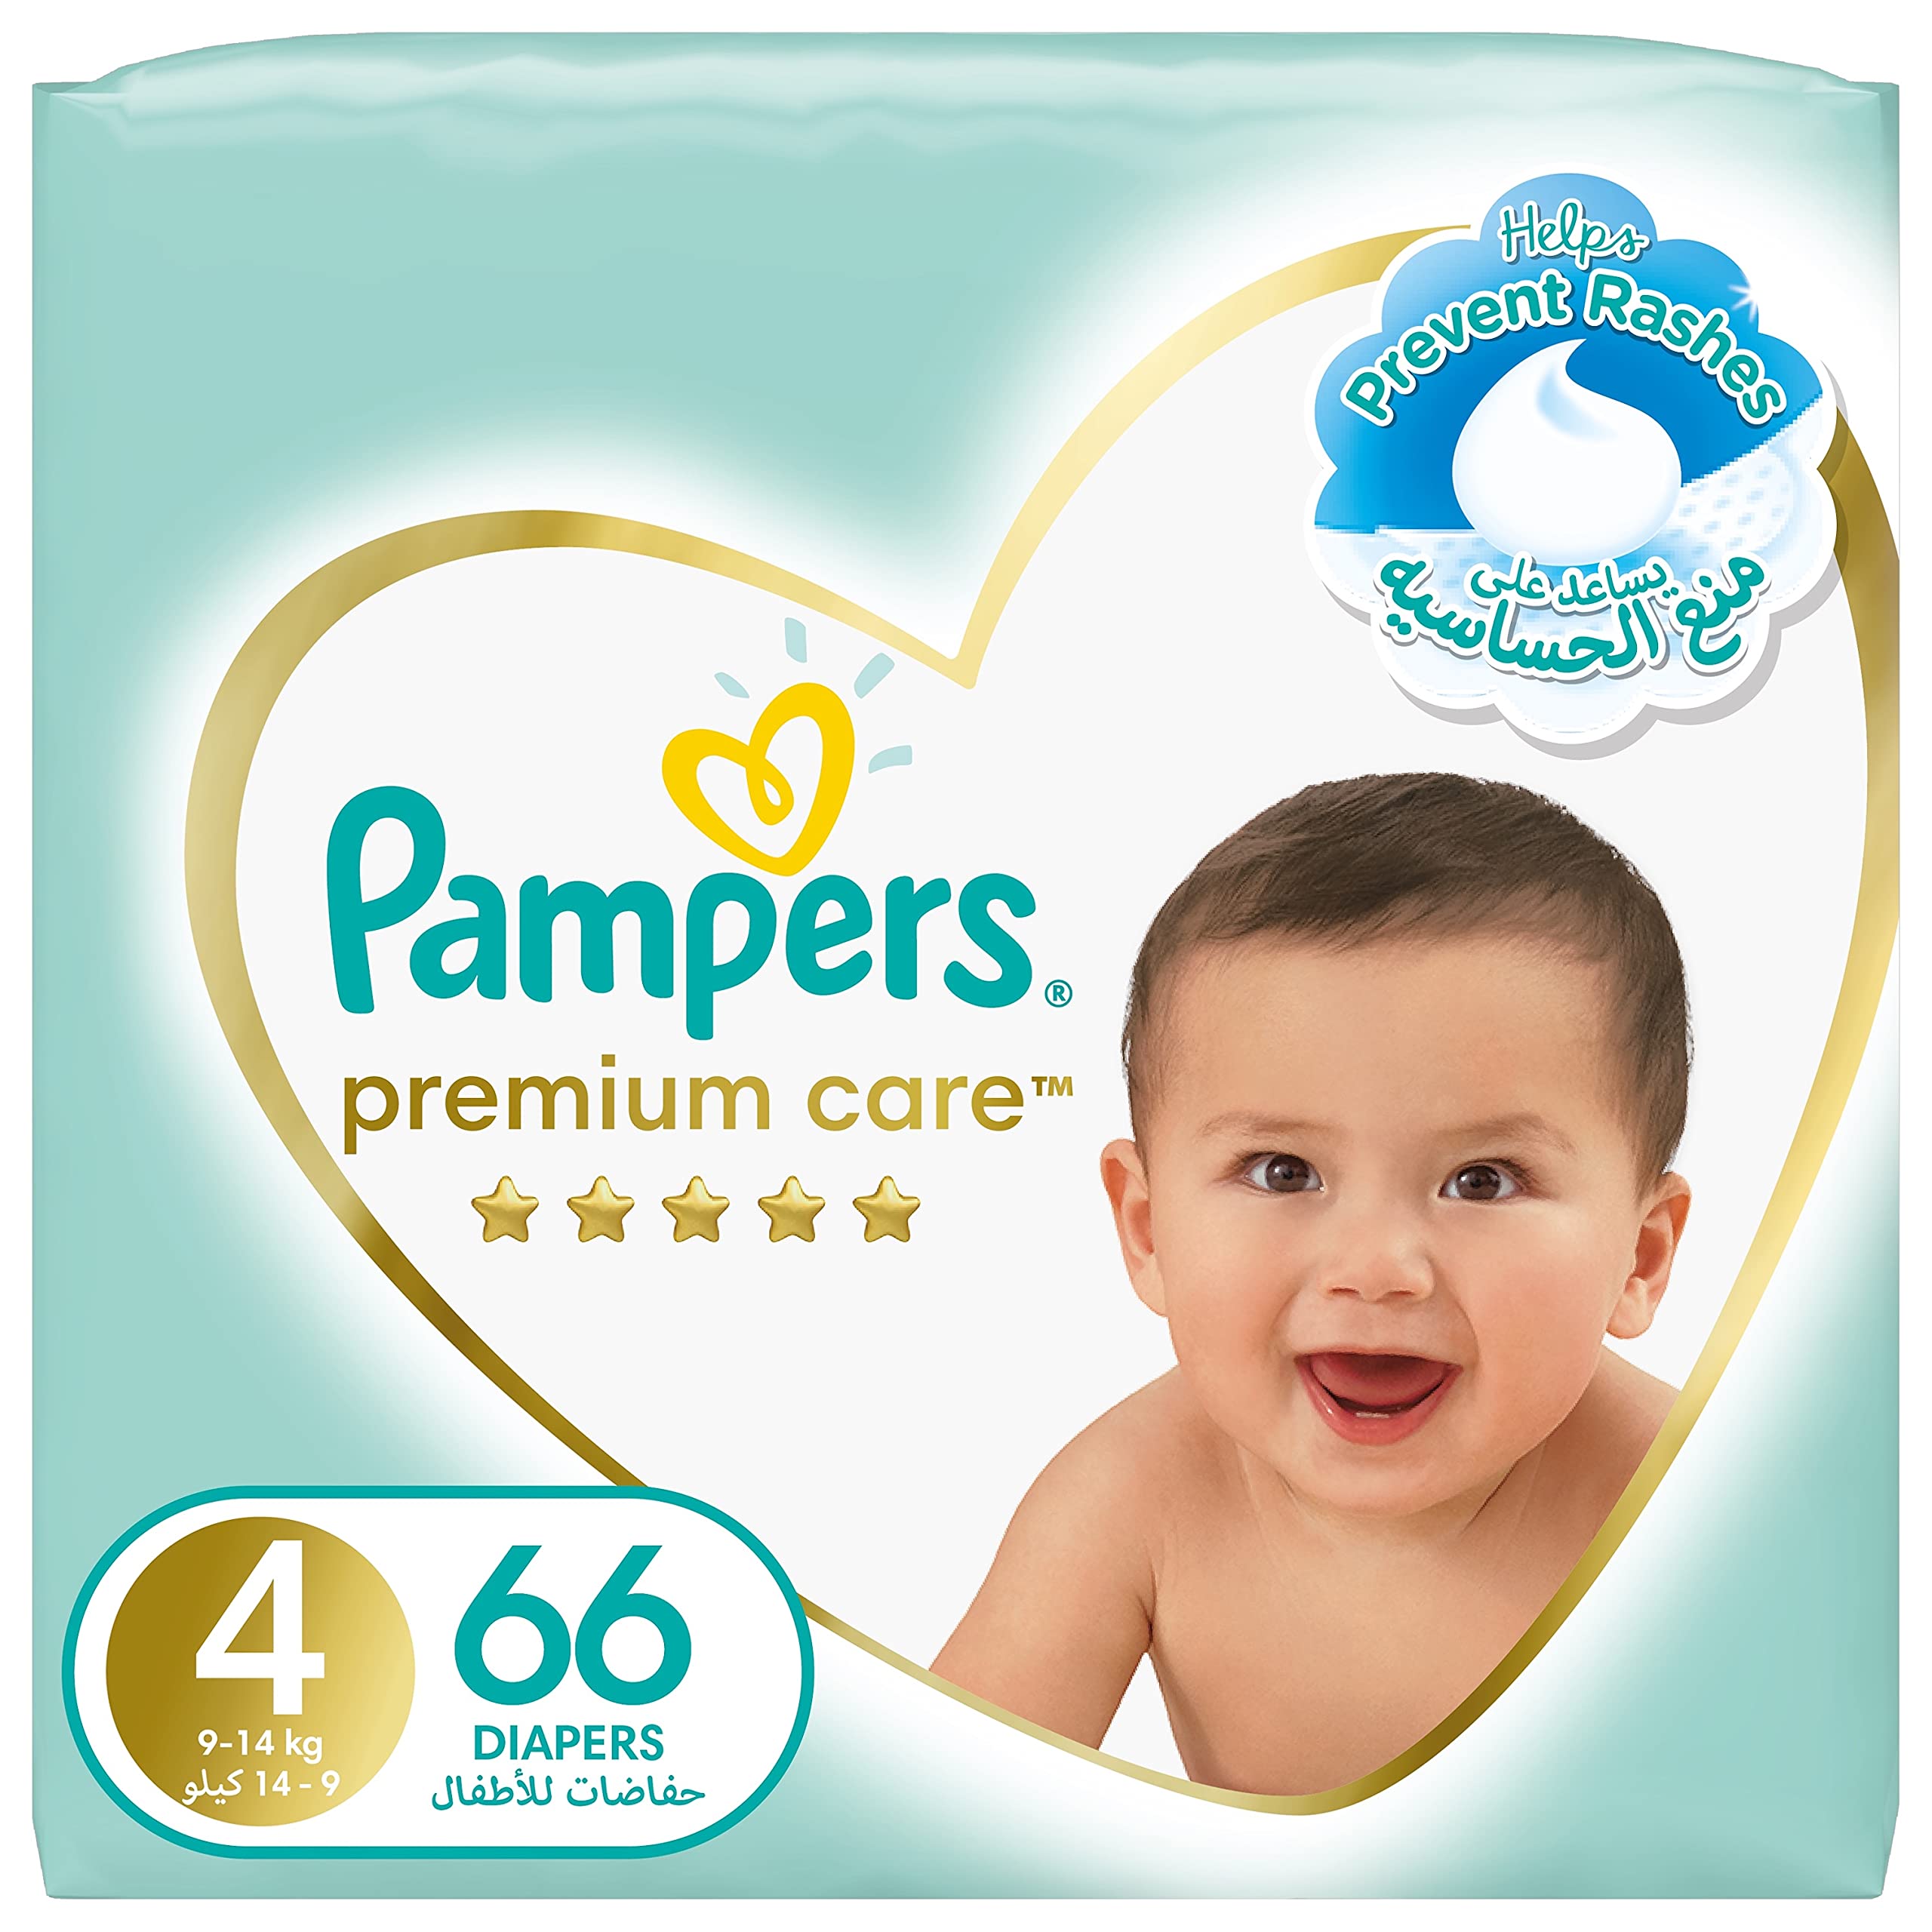 pampers pampers premium care na 9 lat